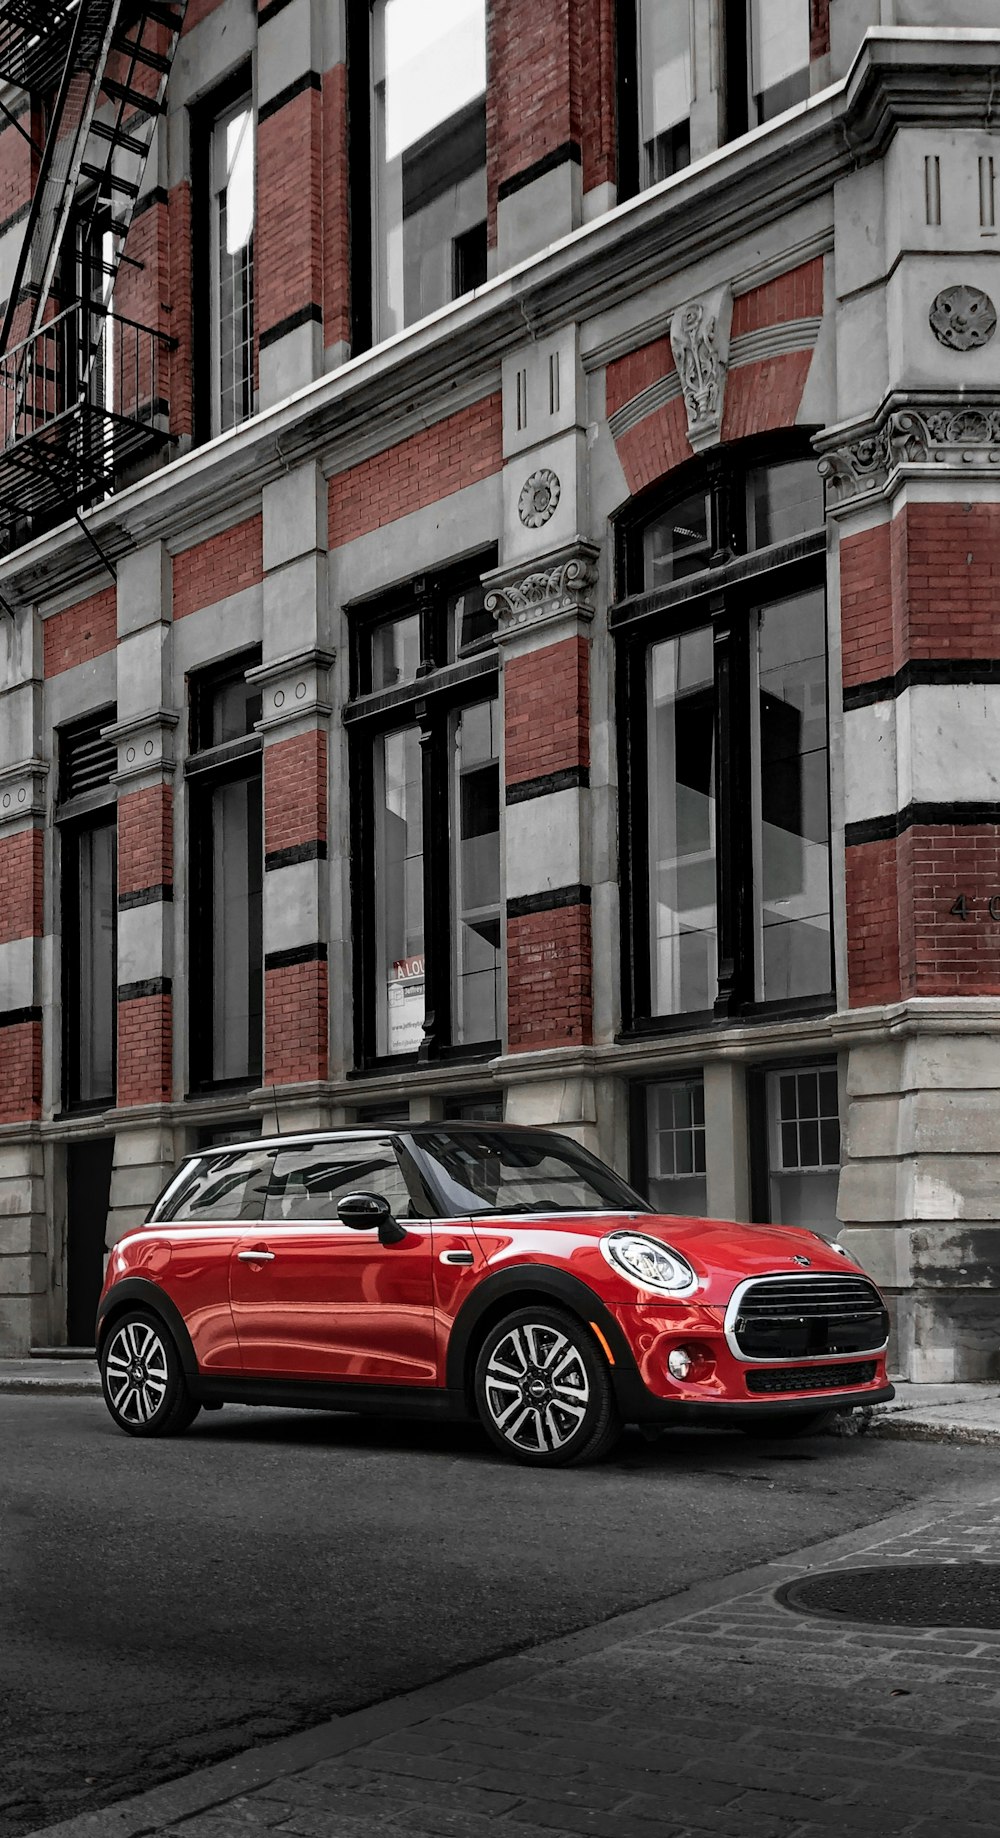 350 Mini Cooper Pictures Hd Download Free Images Stock Photos On Unsplash